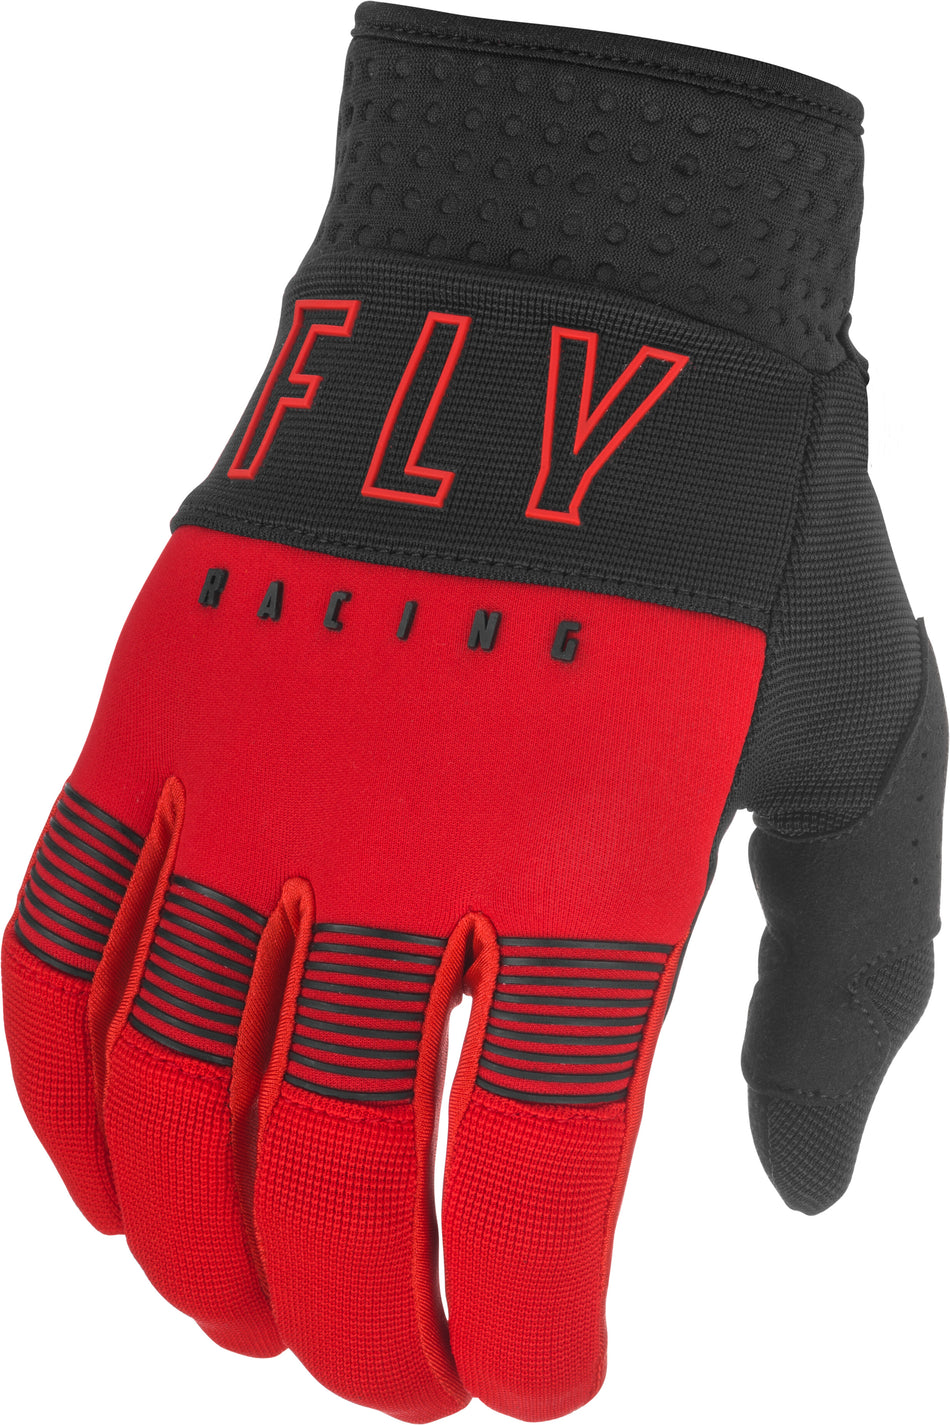 FLY RACING Youth F-16 Gloves Red/Black Sz 06 374-91206